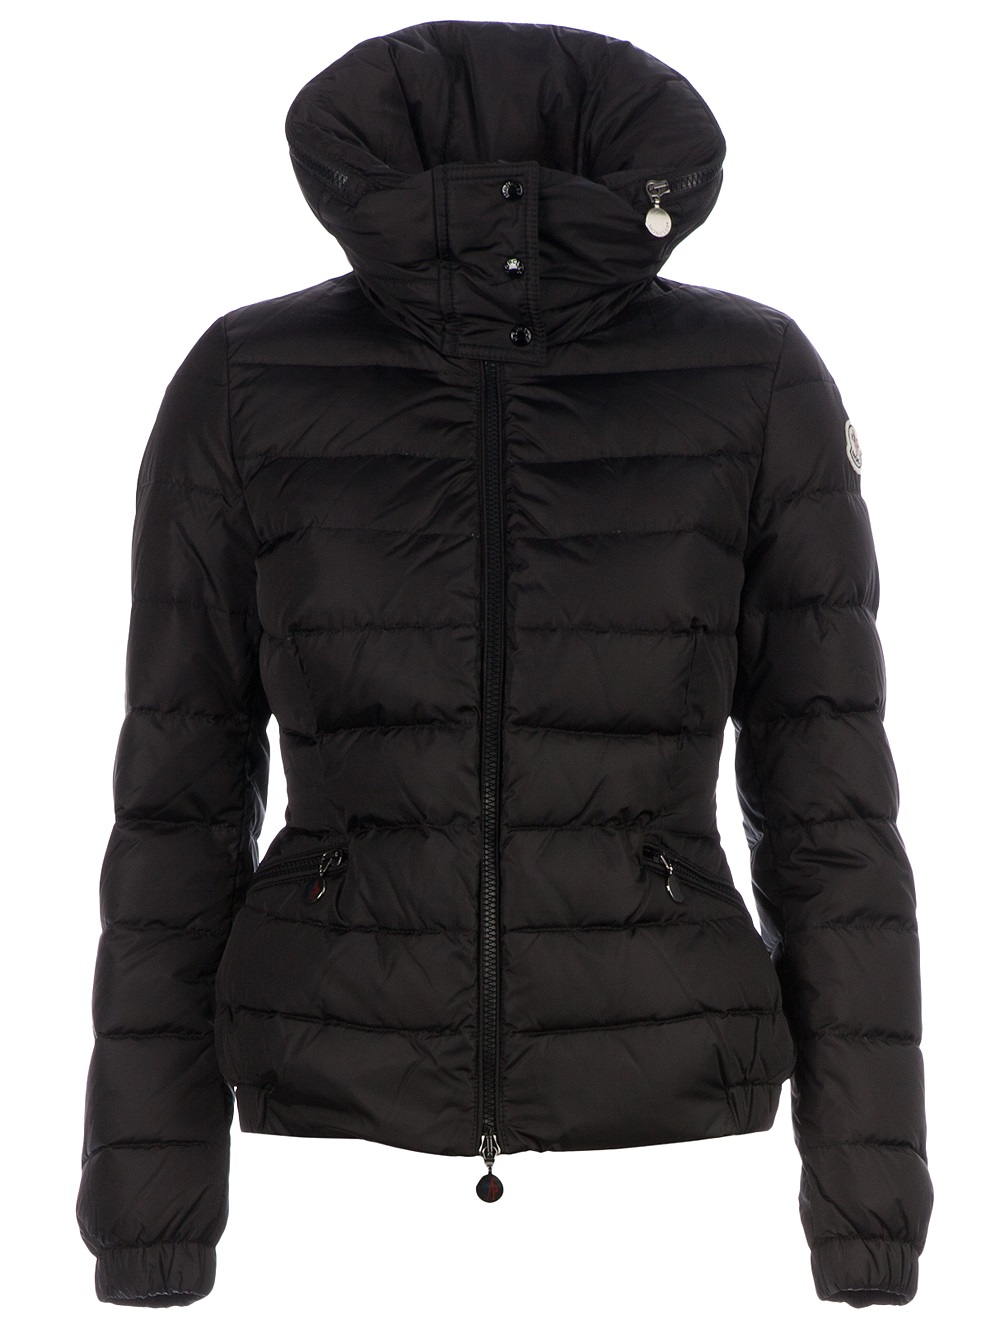 Moncler Sanglier Padded Jacket in Black - Lyst